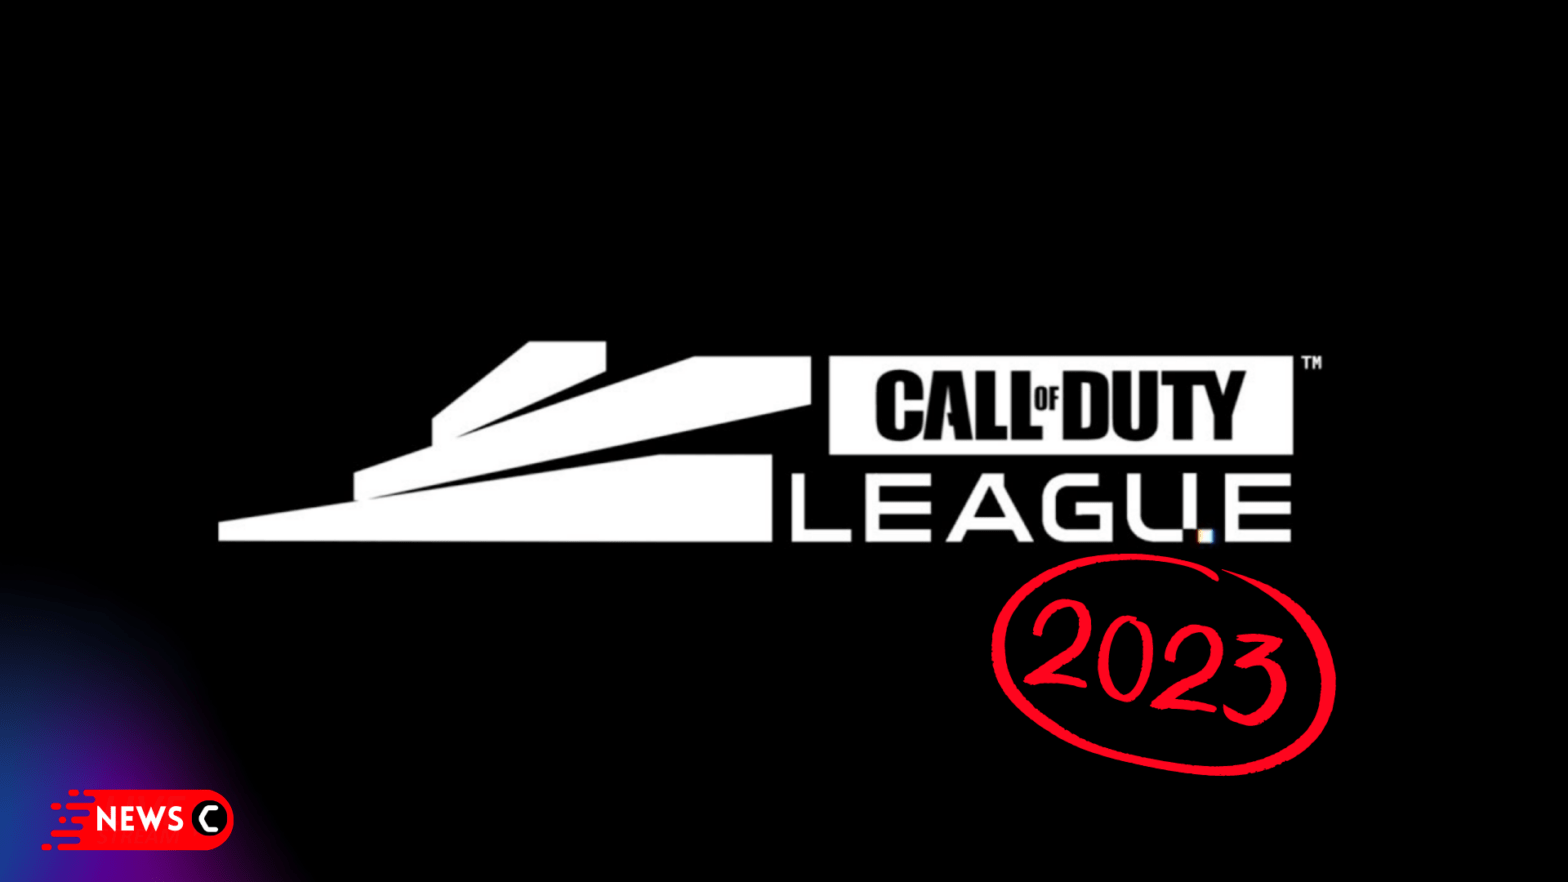 Call of Duty League (CDL) 2023: Schedule, where to watch, and more